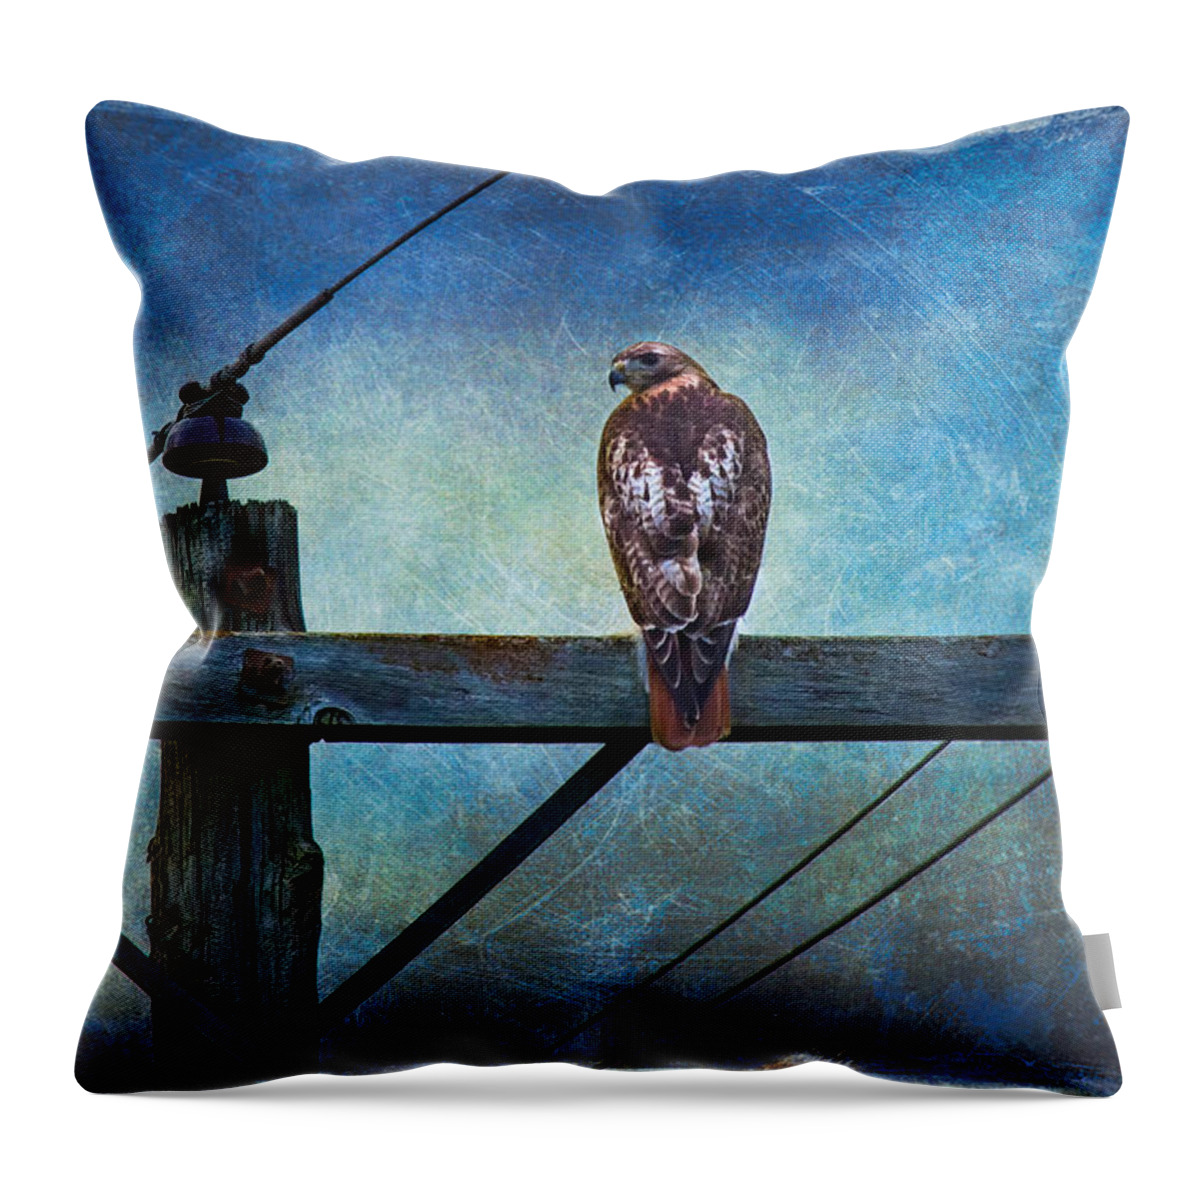 Red-tailed Hawk Throw Pillow featuring the photograph Red-tailed Hawk On Power Pole by Anna Louise